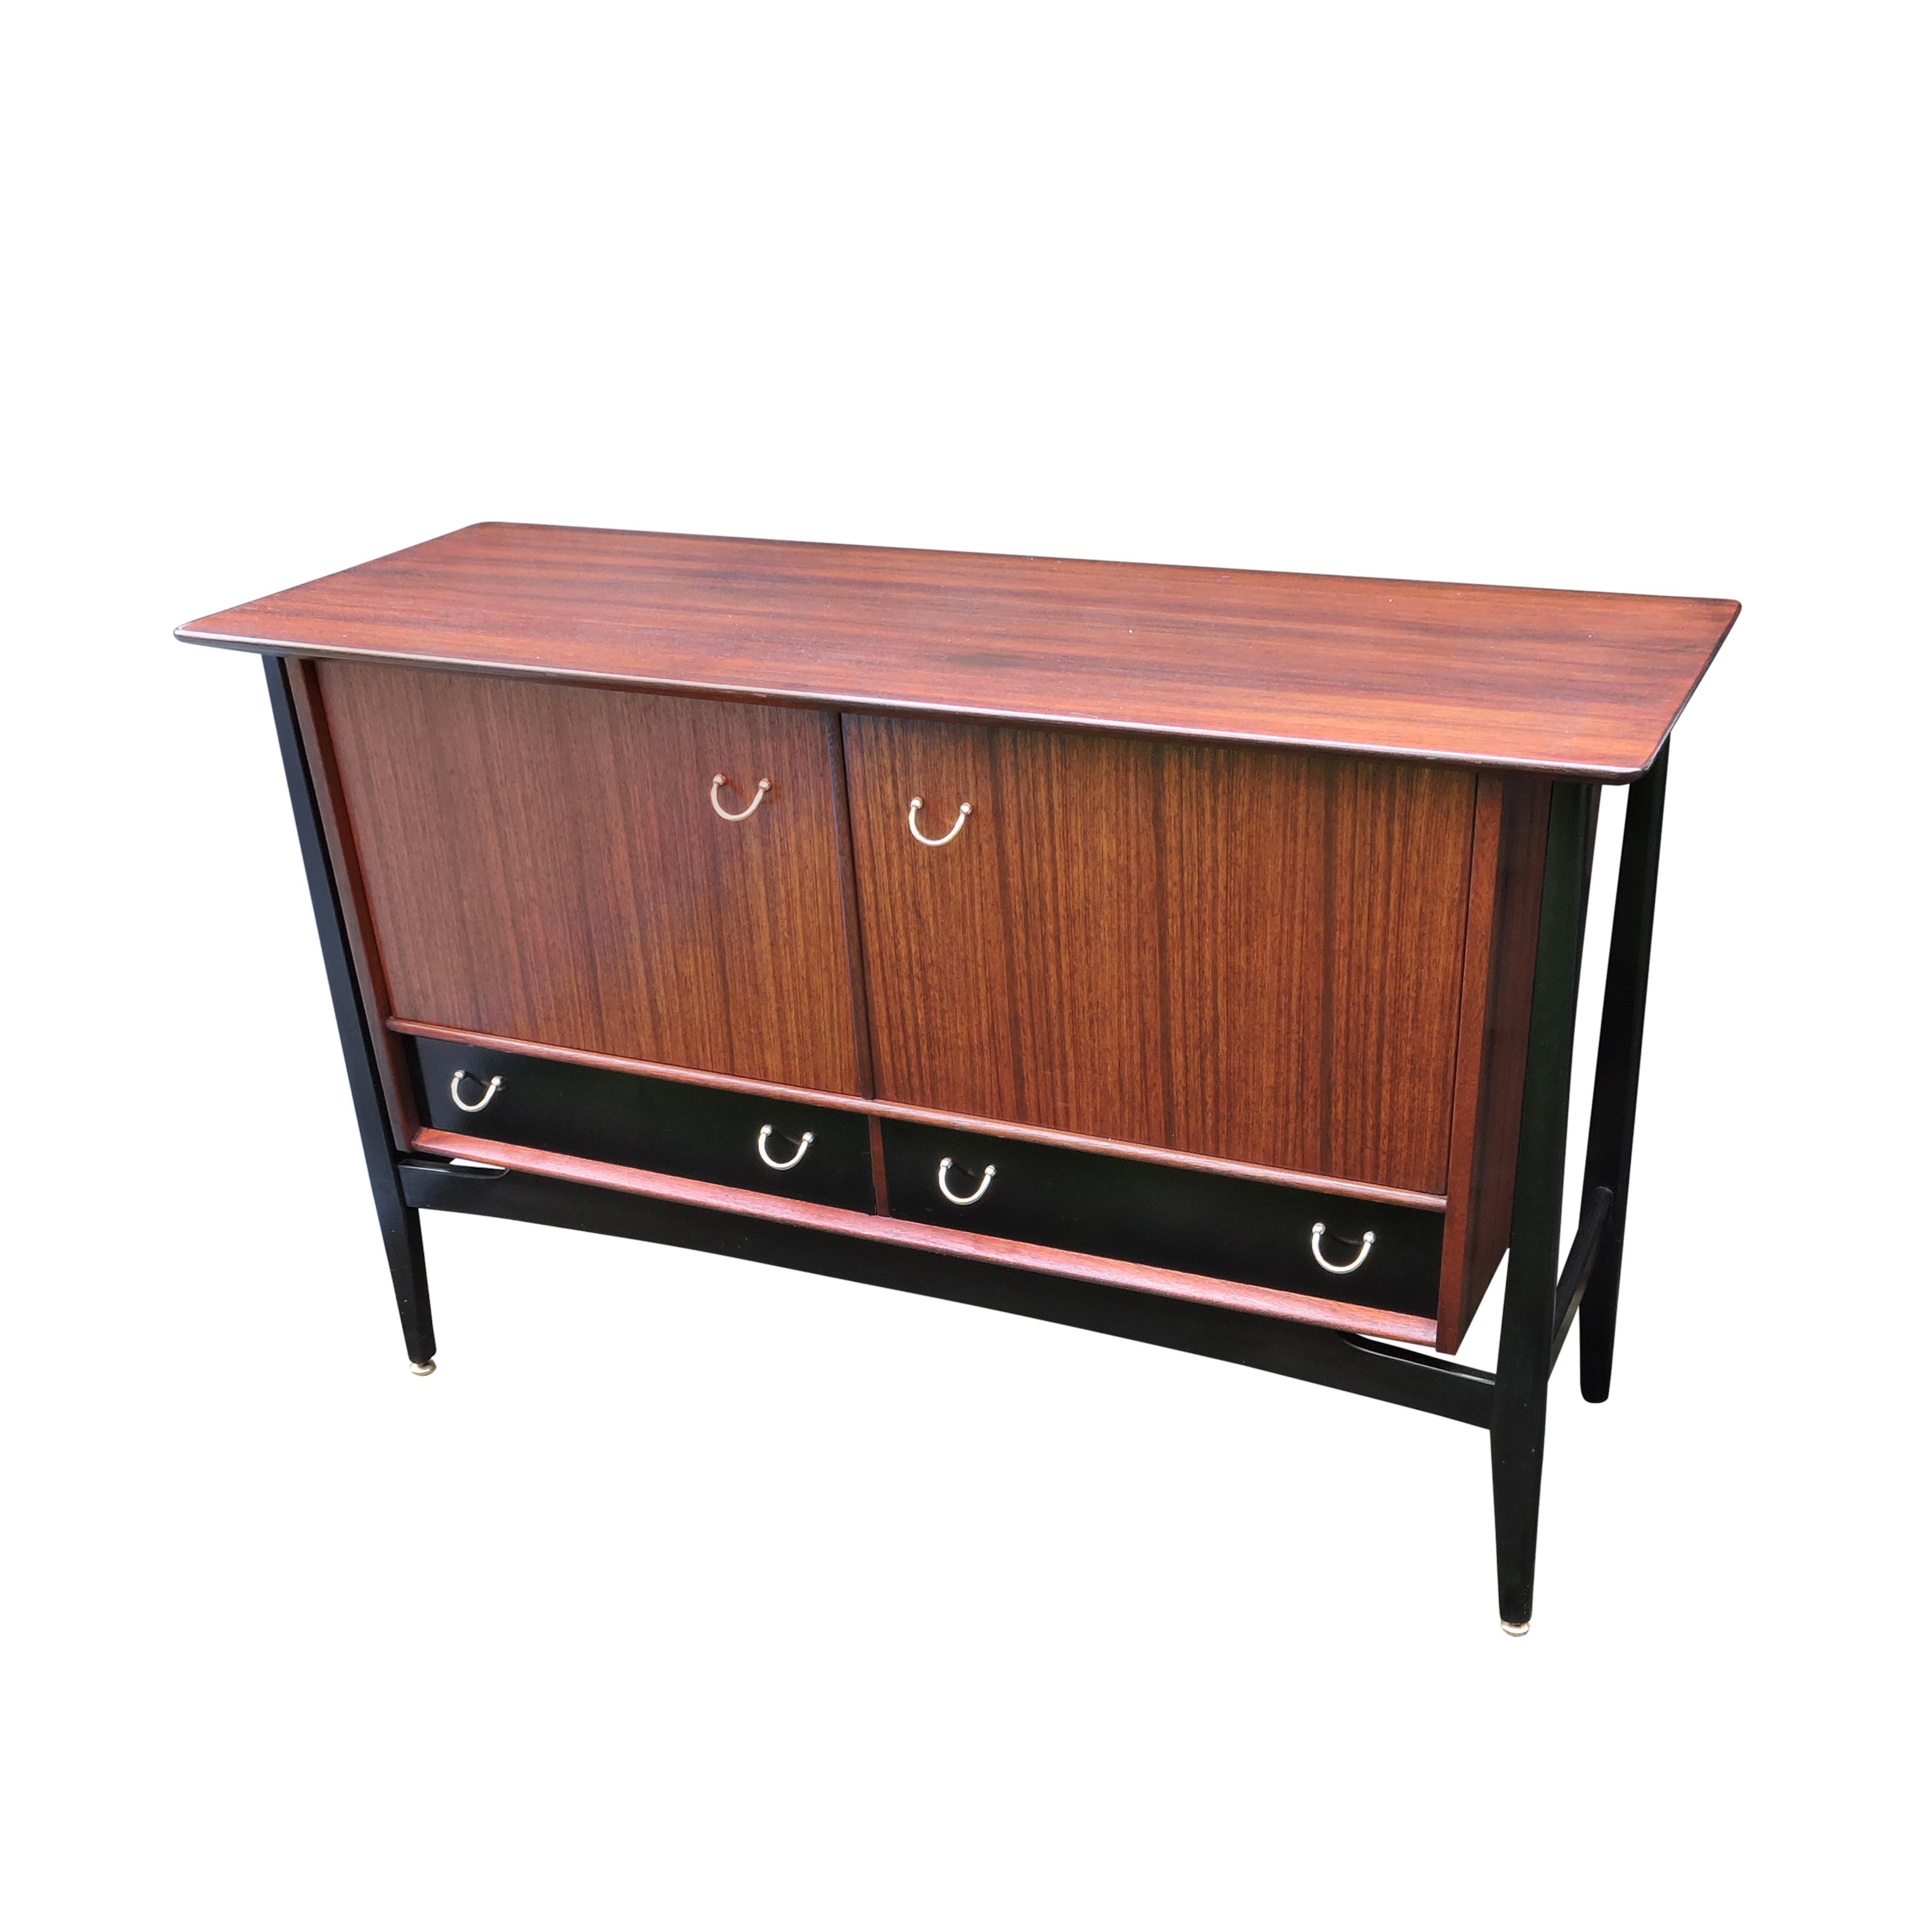 - Sideboard produced by G-Plan in the 1950s.
- Tola wood
- Brass handles
- Ebonised legs.